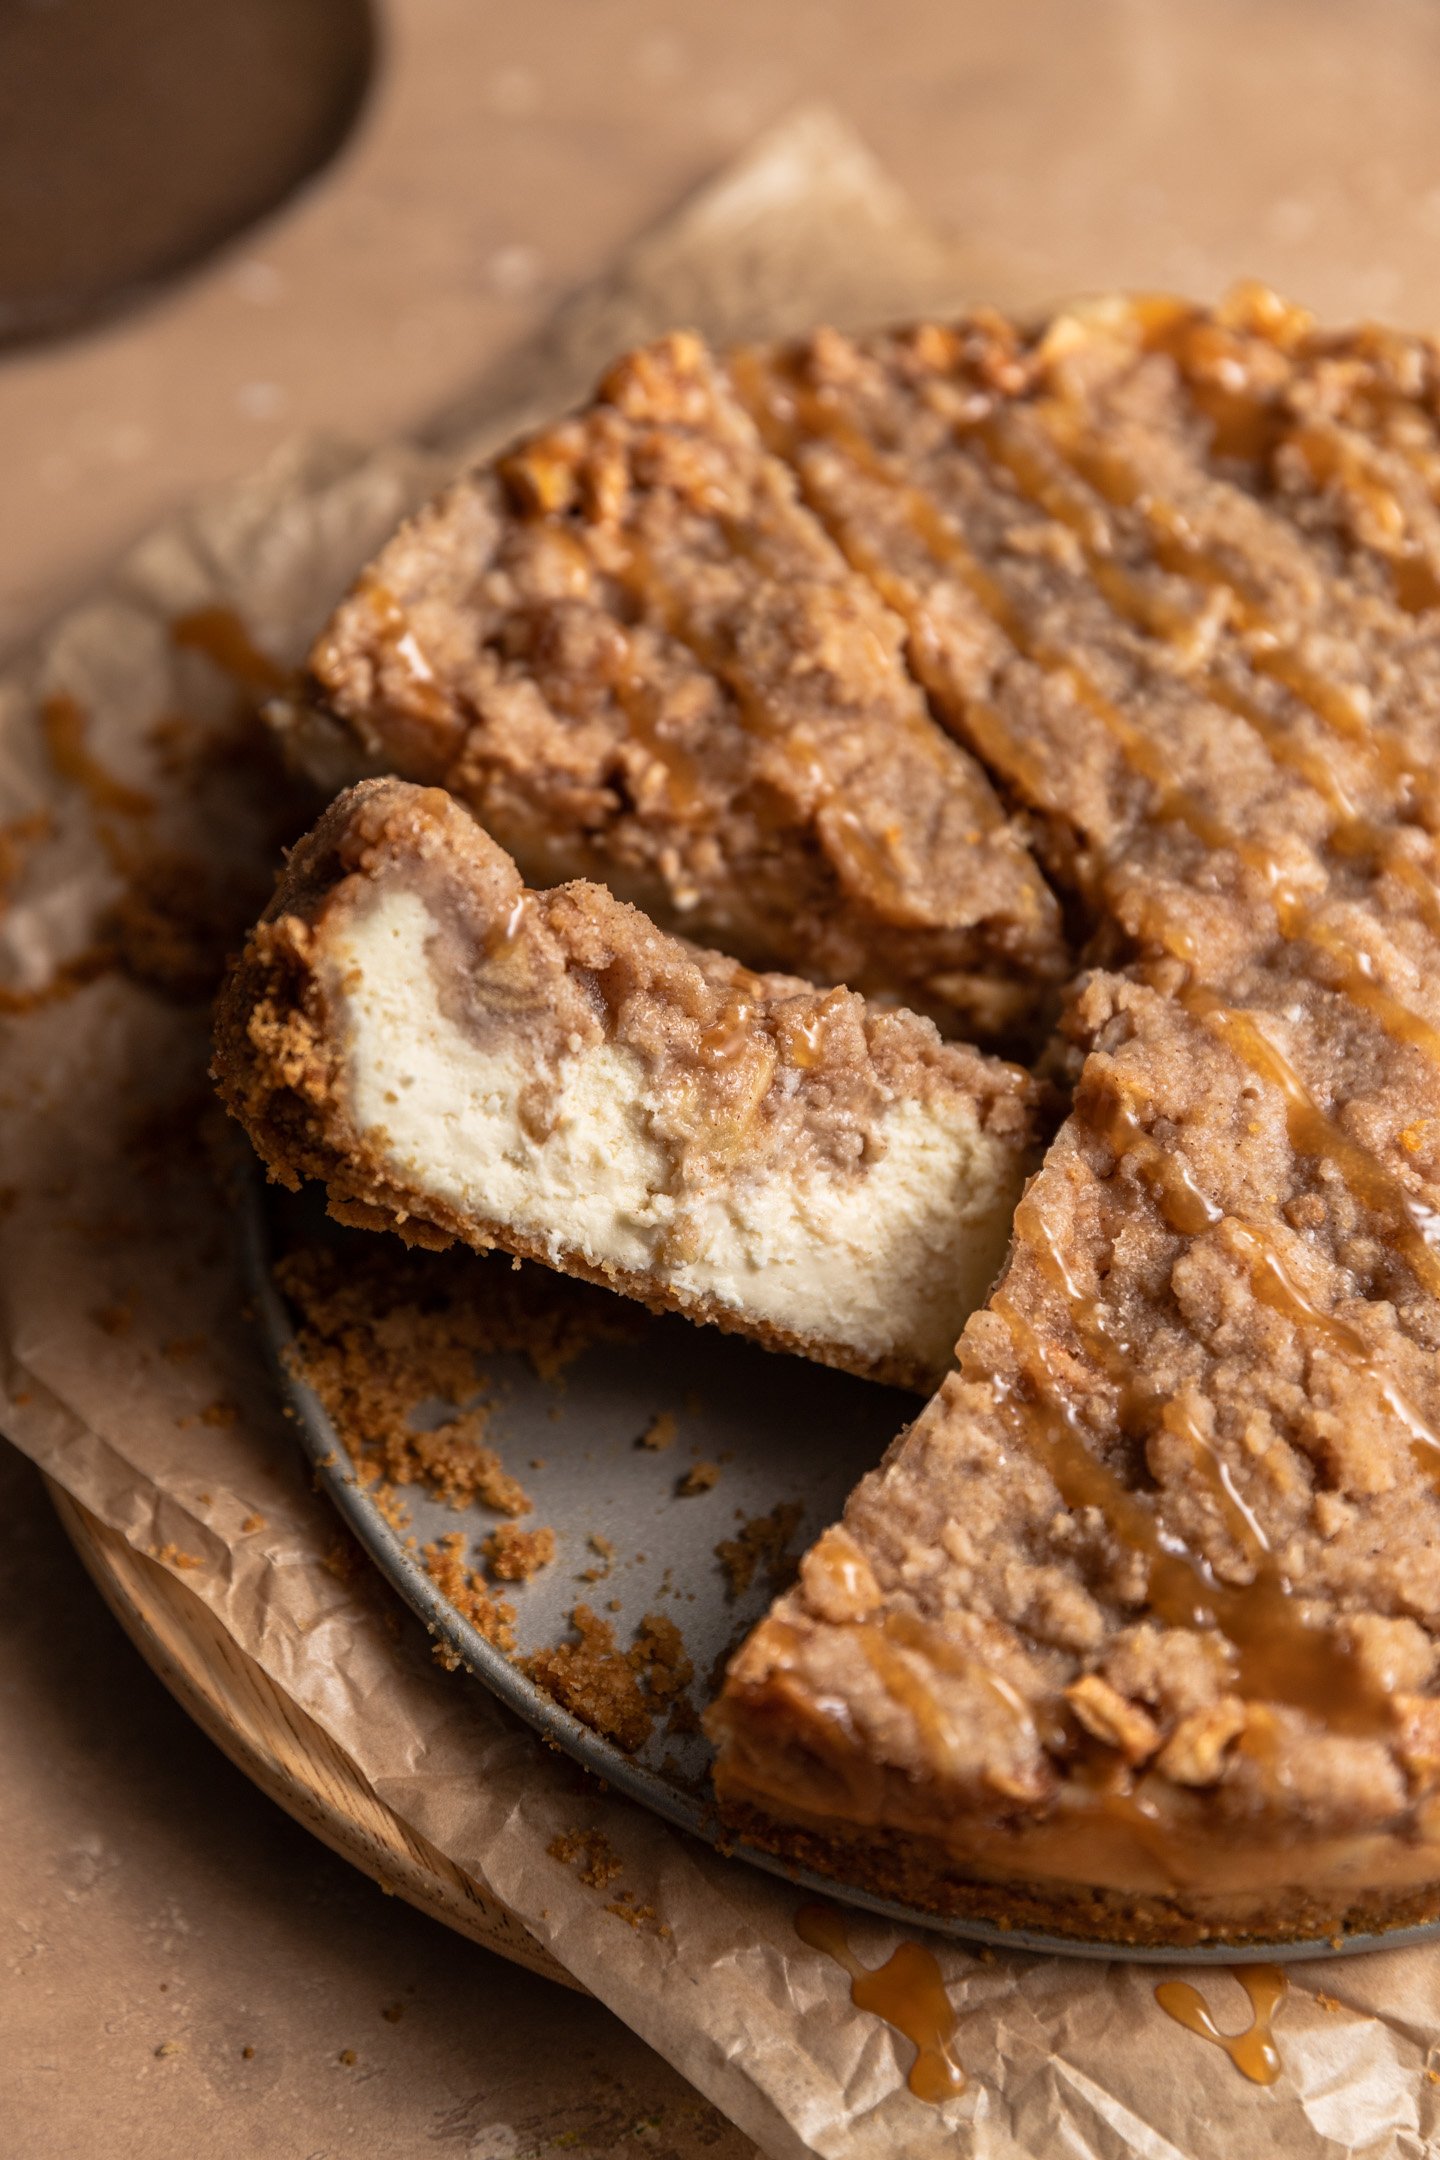 An apple pie cheesecake slice on its side.